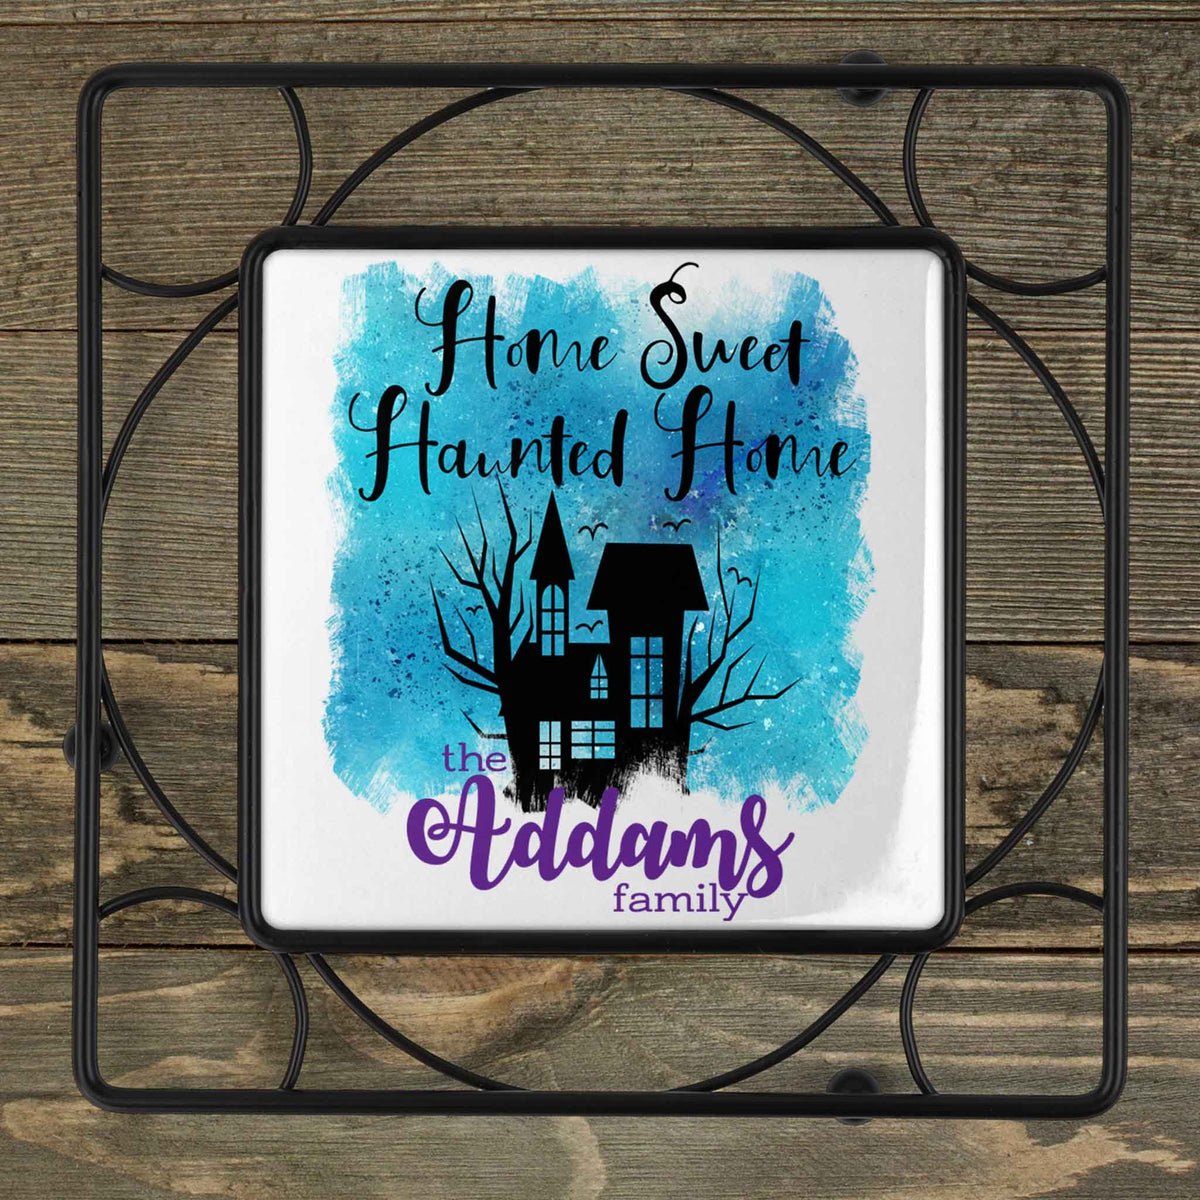 Personalized Iron Trivet | Custom Kitchen Gifts | Home Sweet Haunted Home